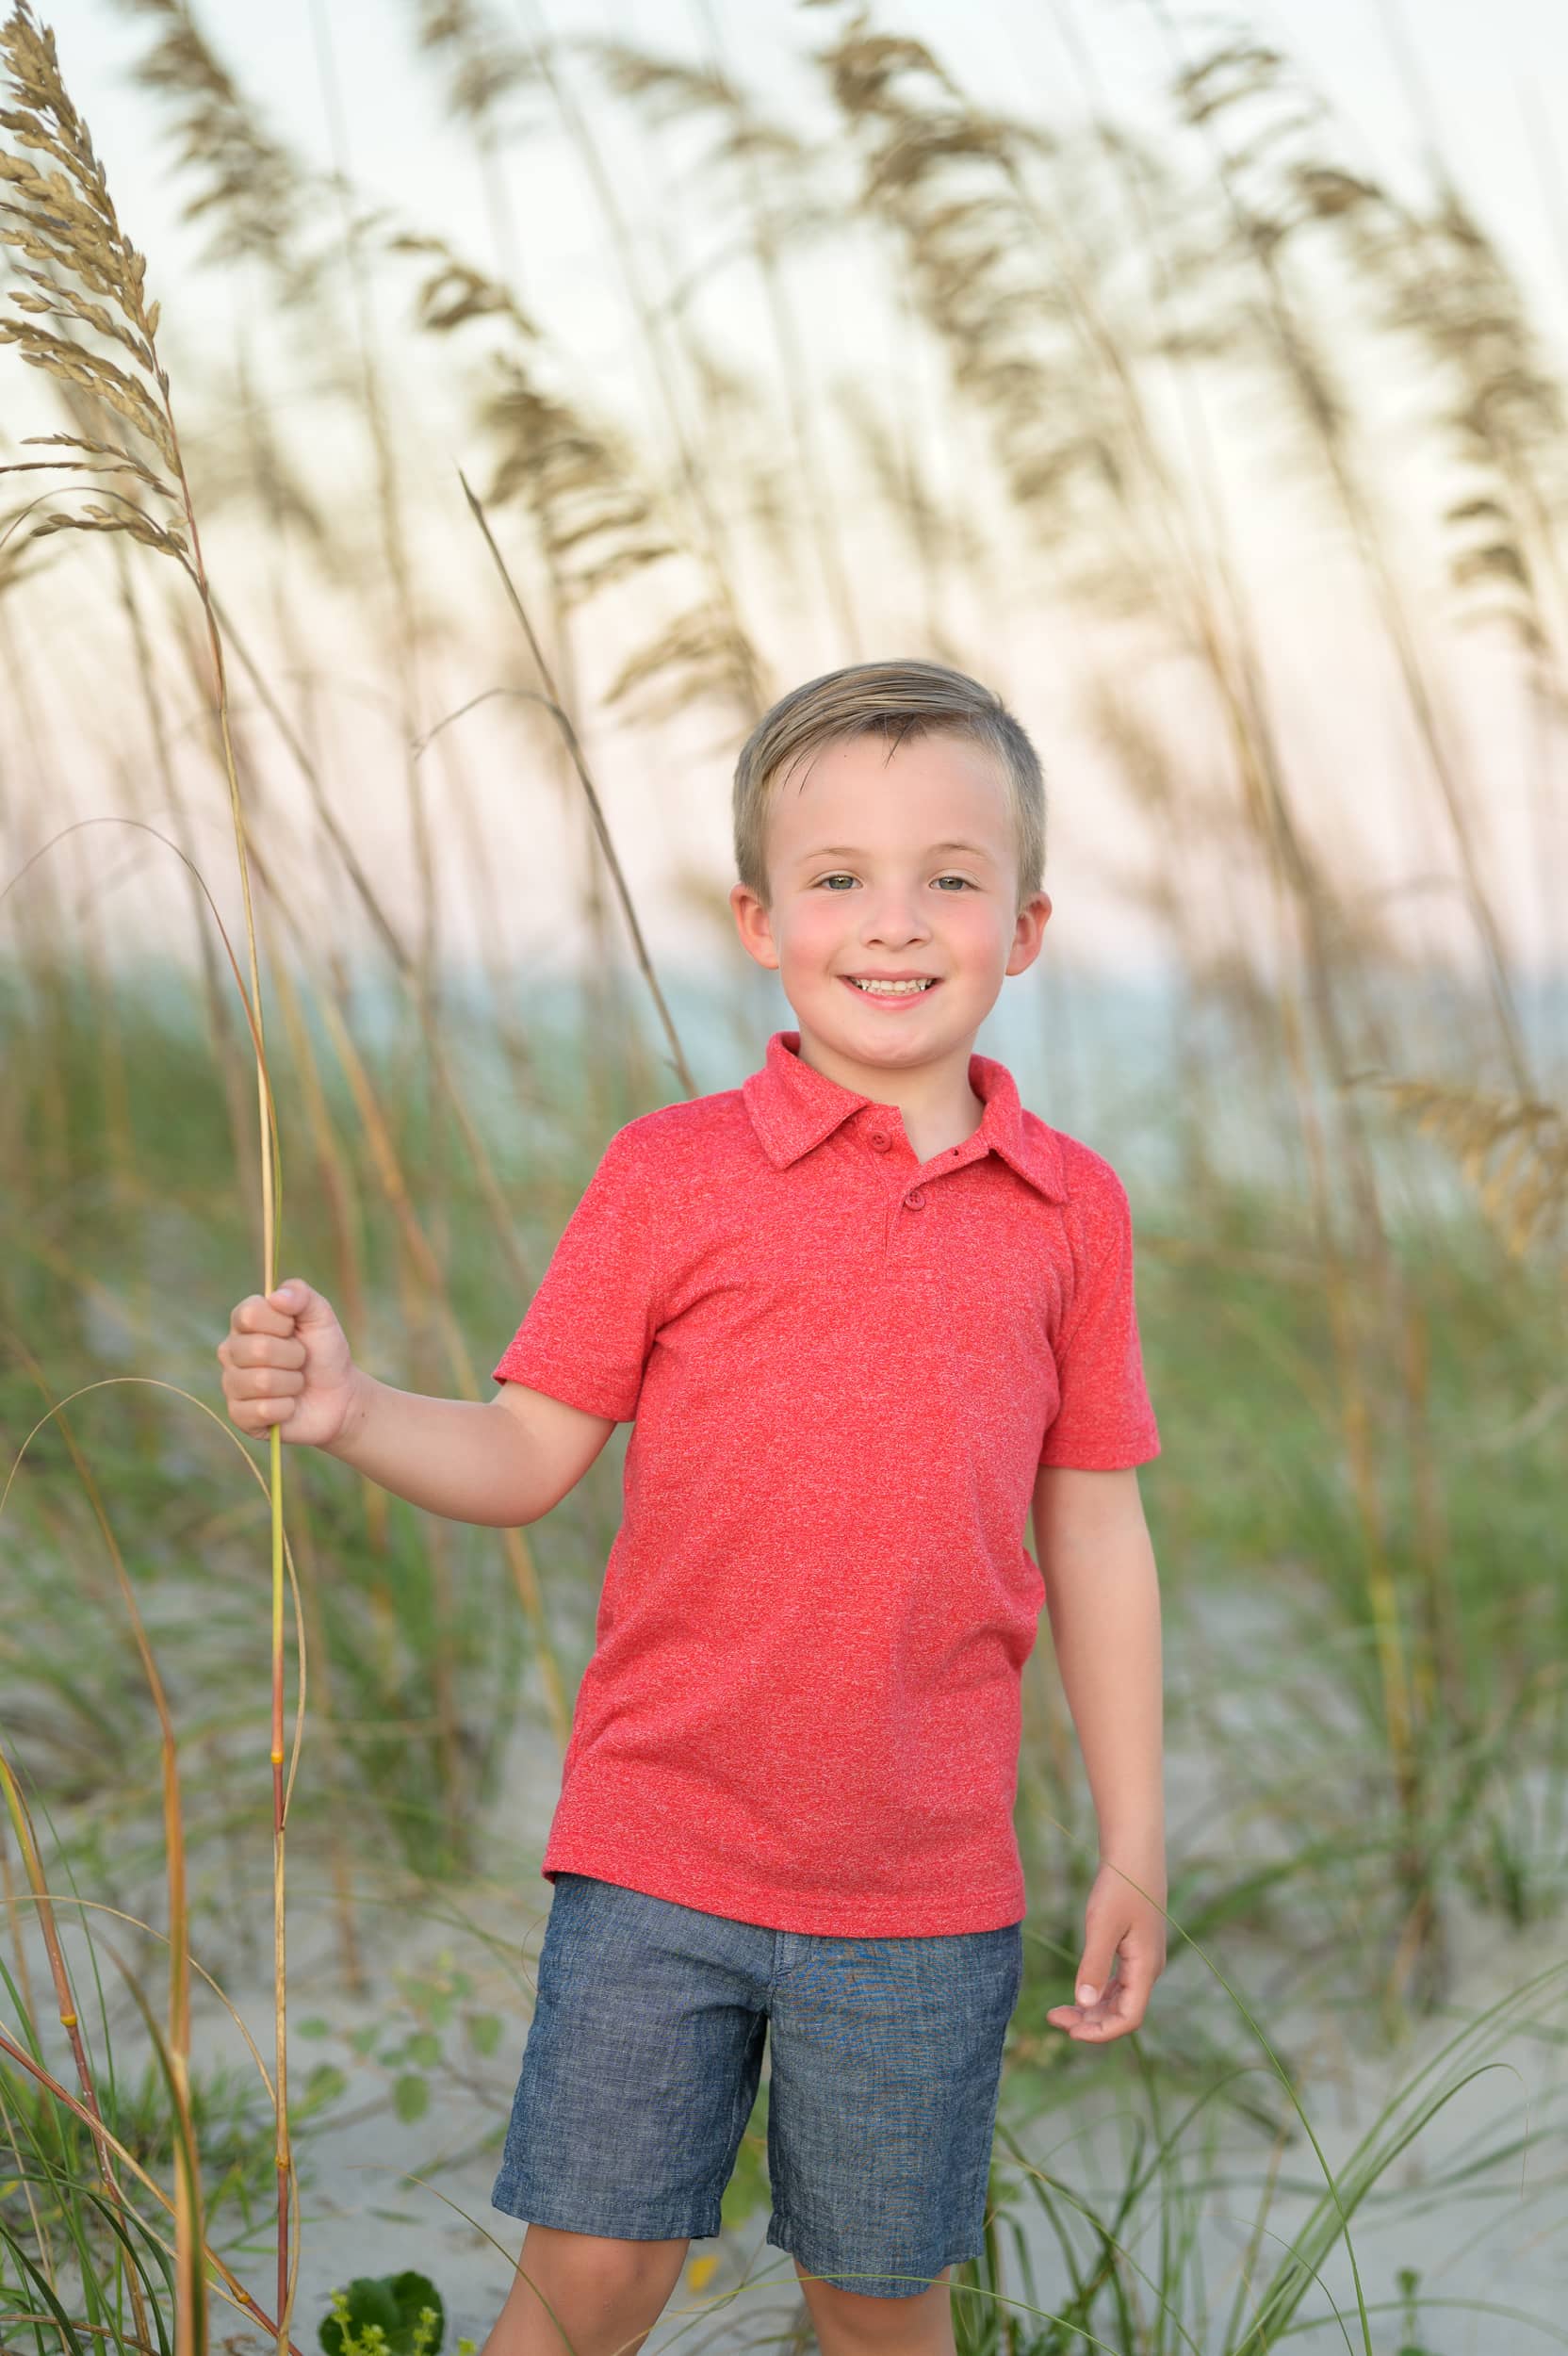 Little boy in front of the sea oats at sunset - Huntington Beach State Park